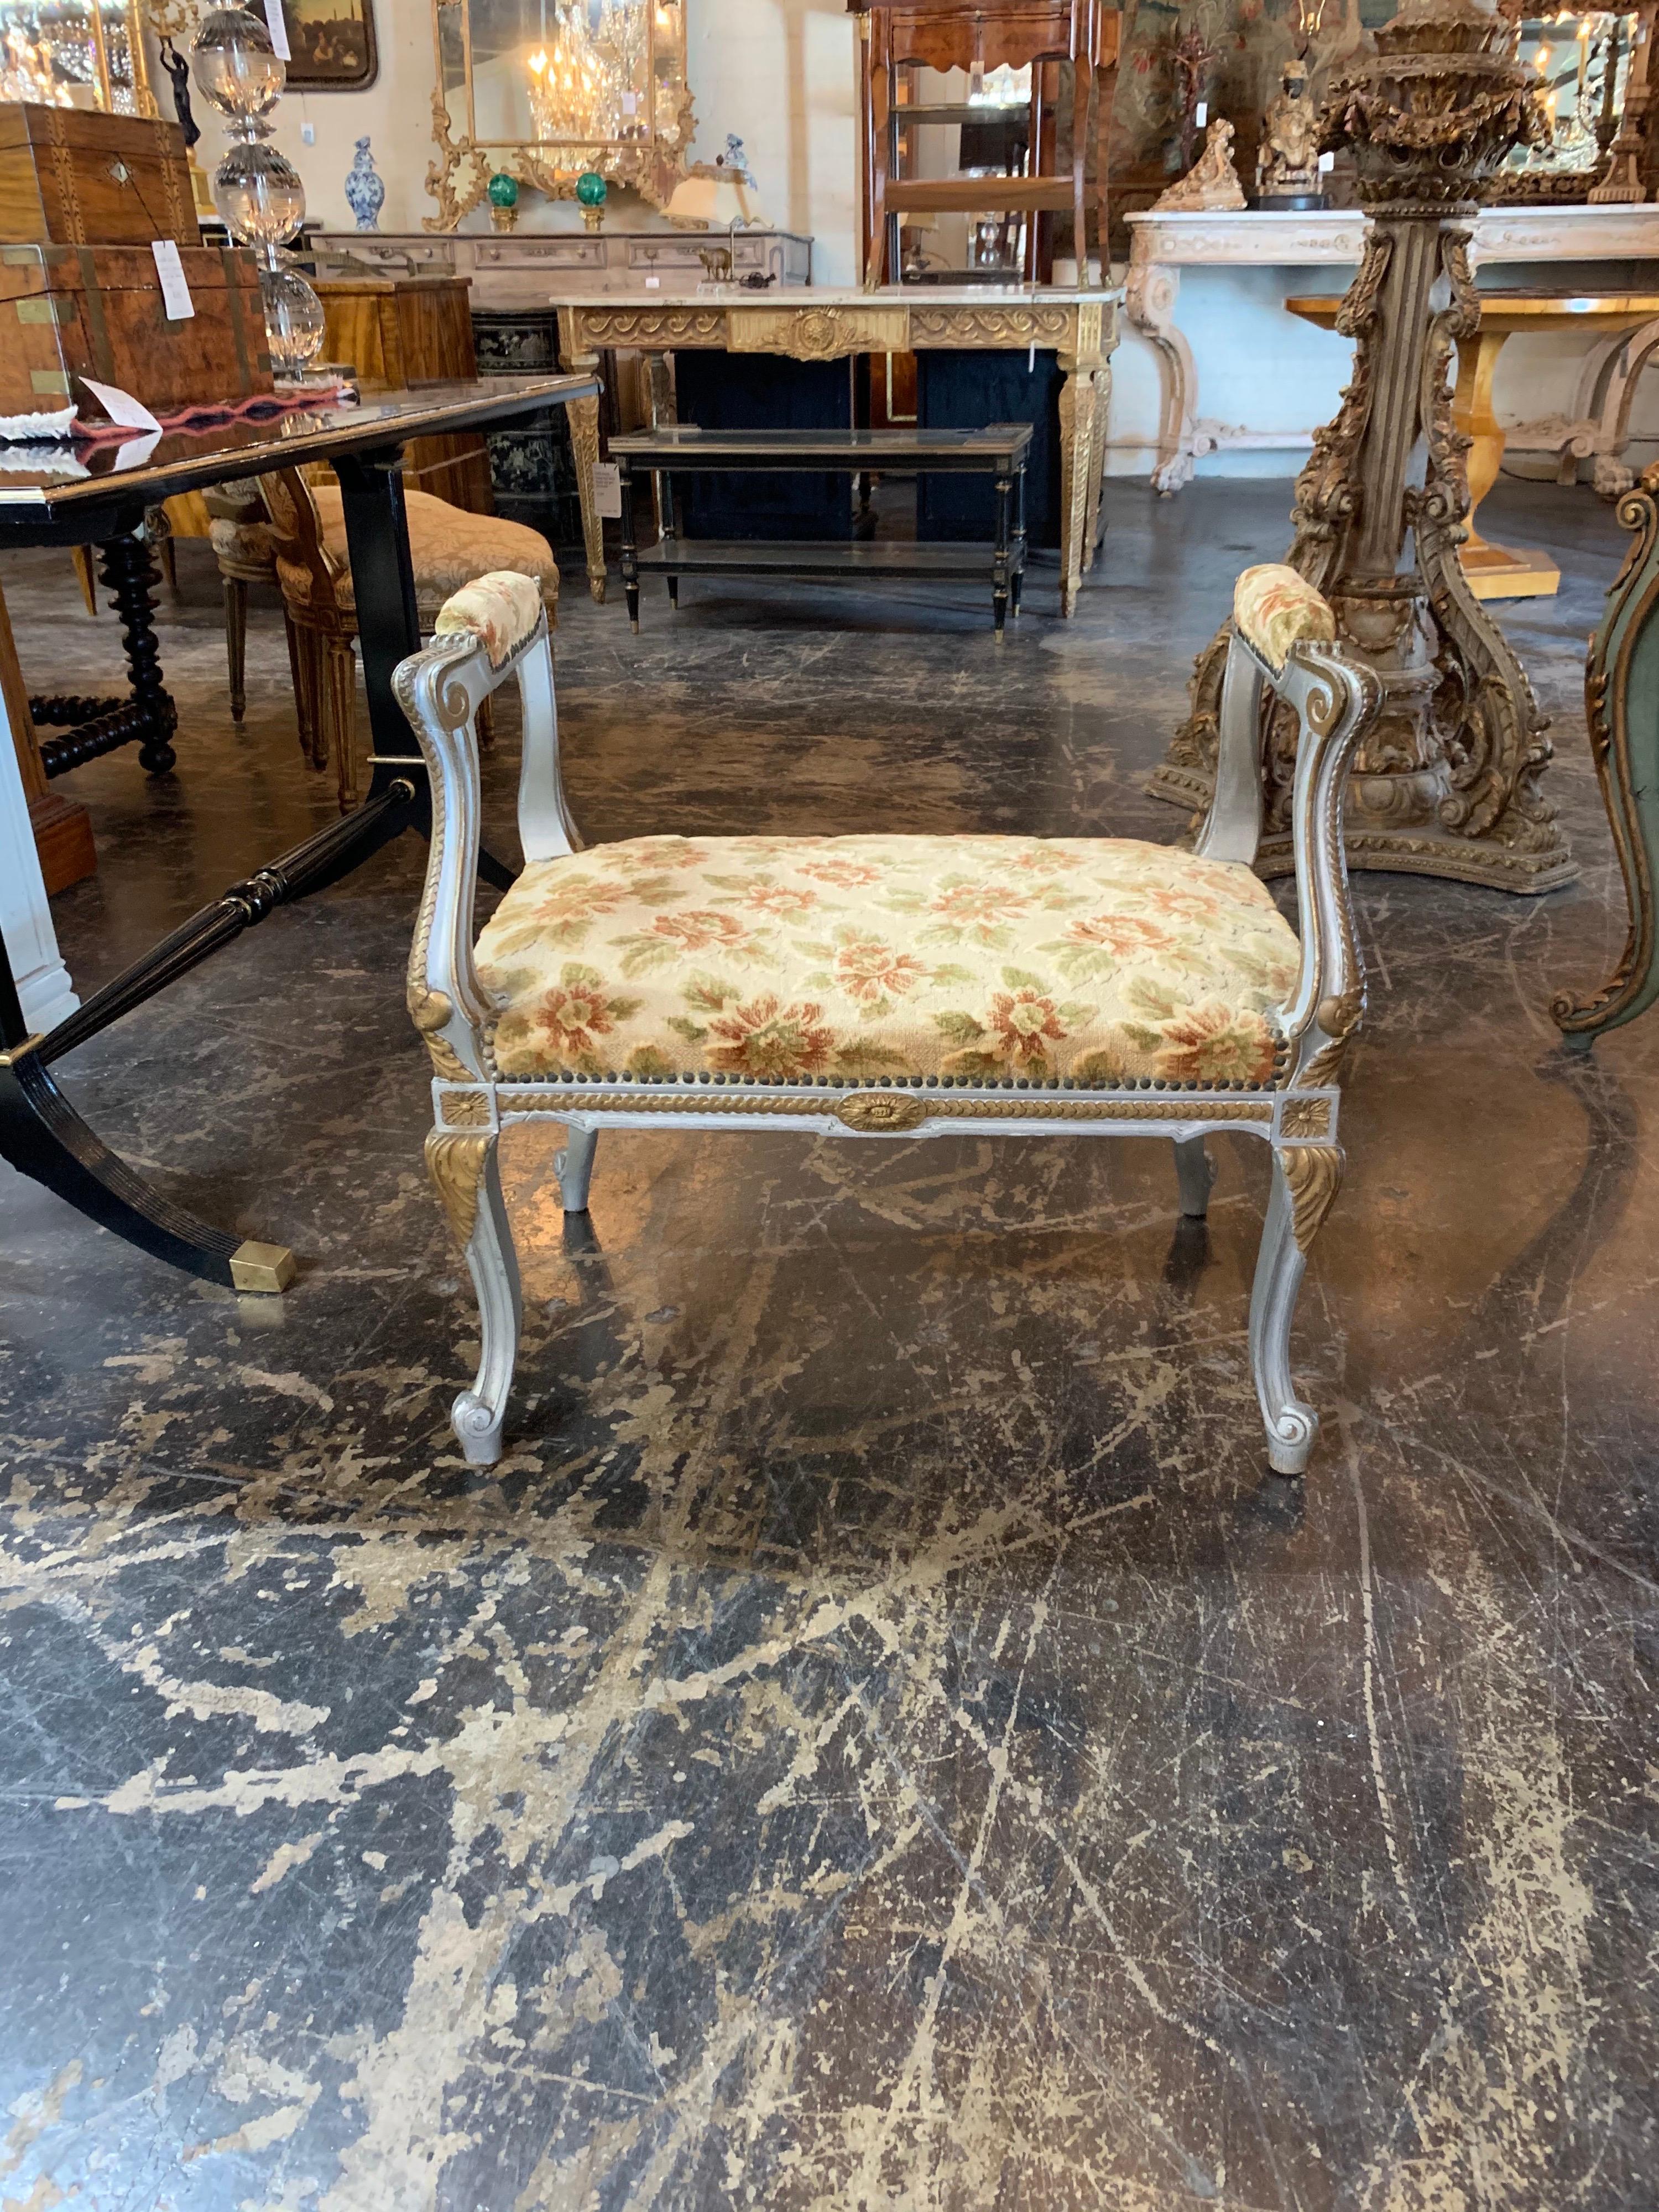 Elegant 19th century carved and parcel-gilt Louis XVI style window bench. Beautiful carved details on the wood and upholstered in a lovely floral fabric. This piece would be great in a ladies dressing room. So pretty!